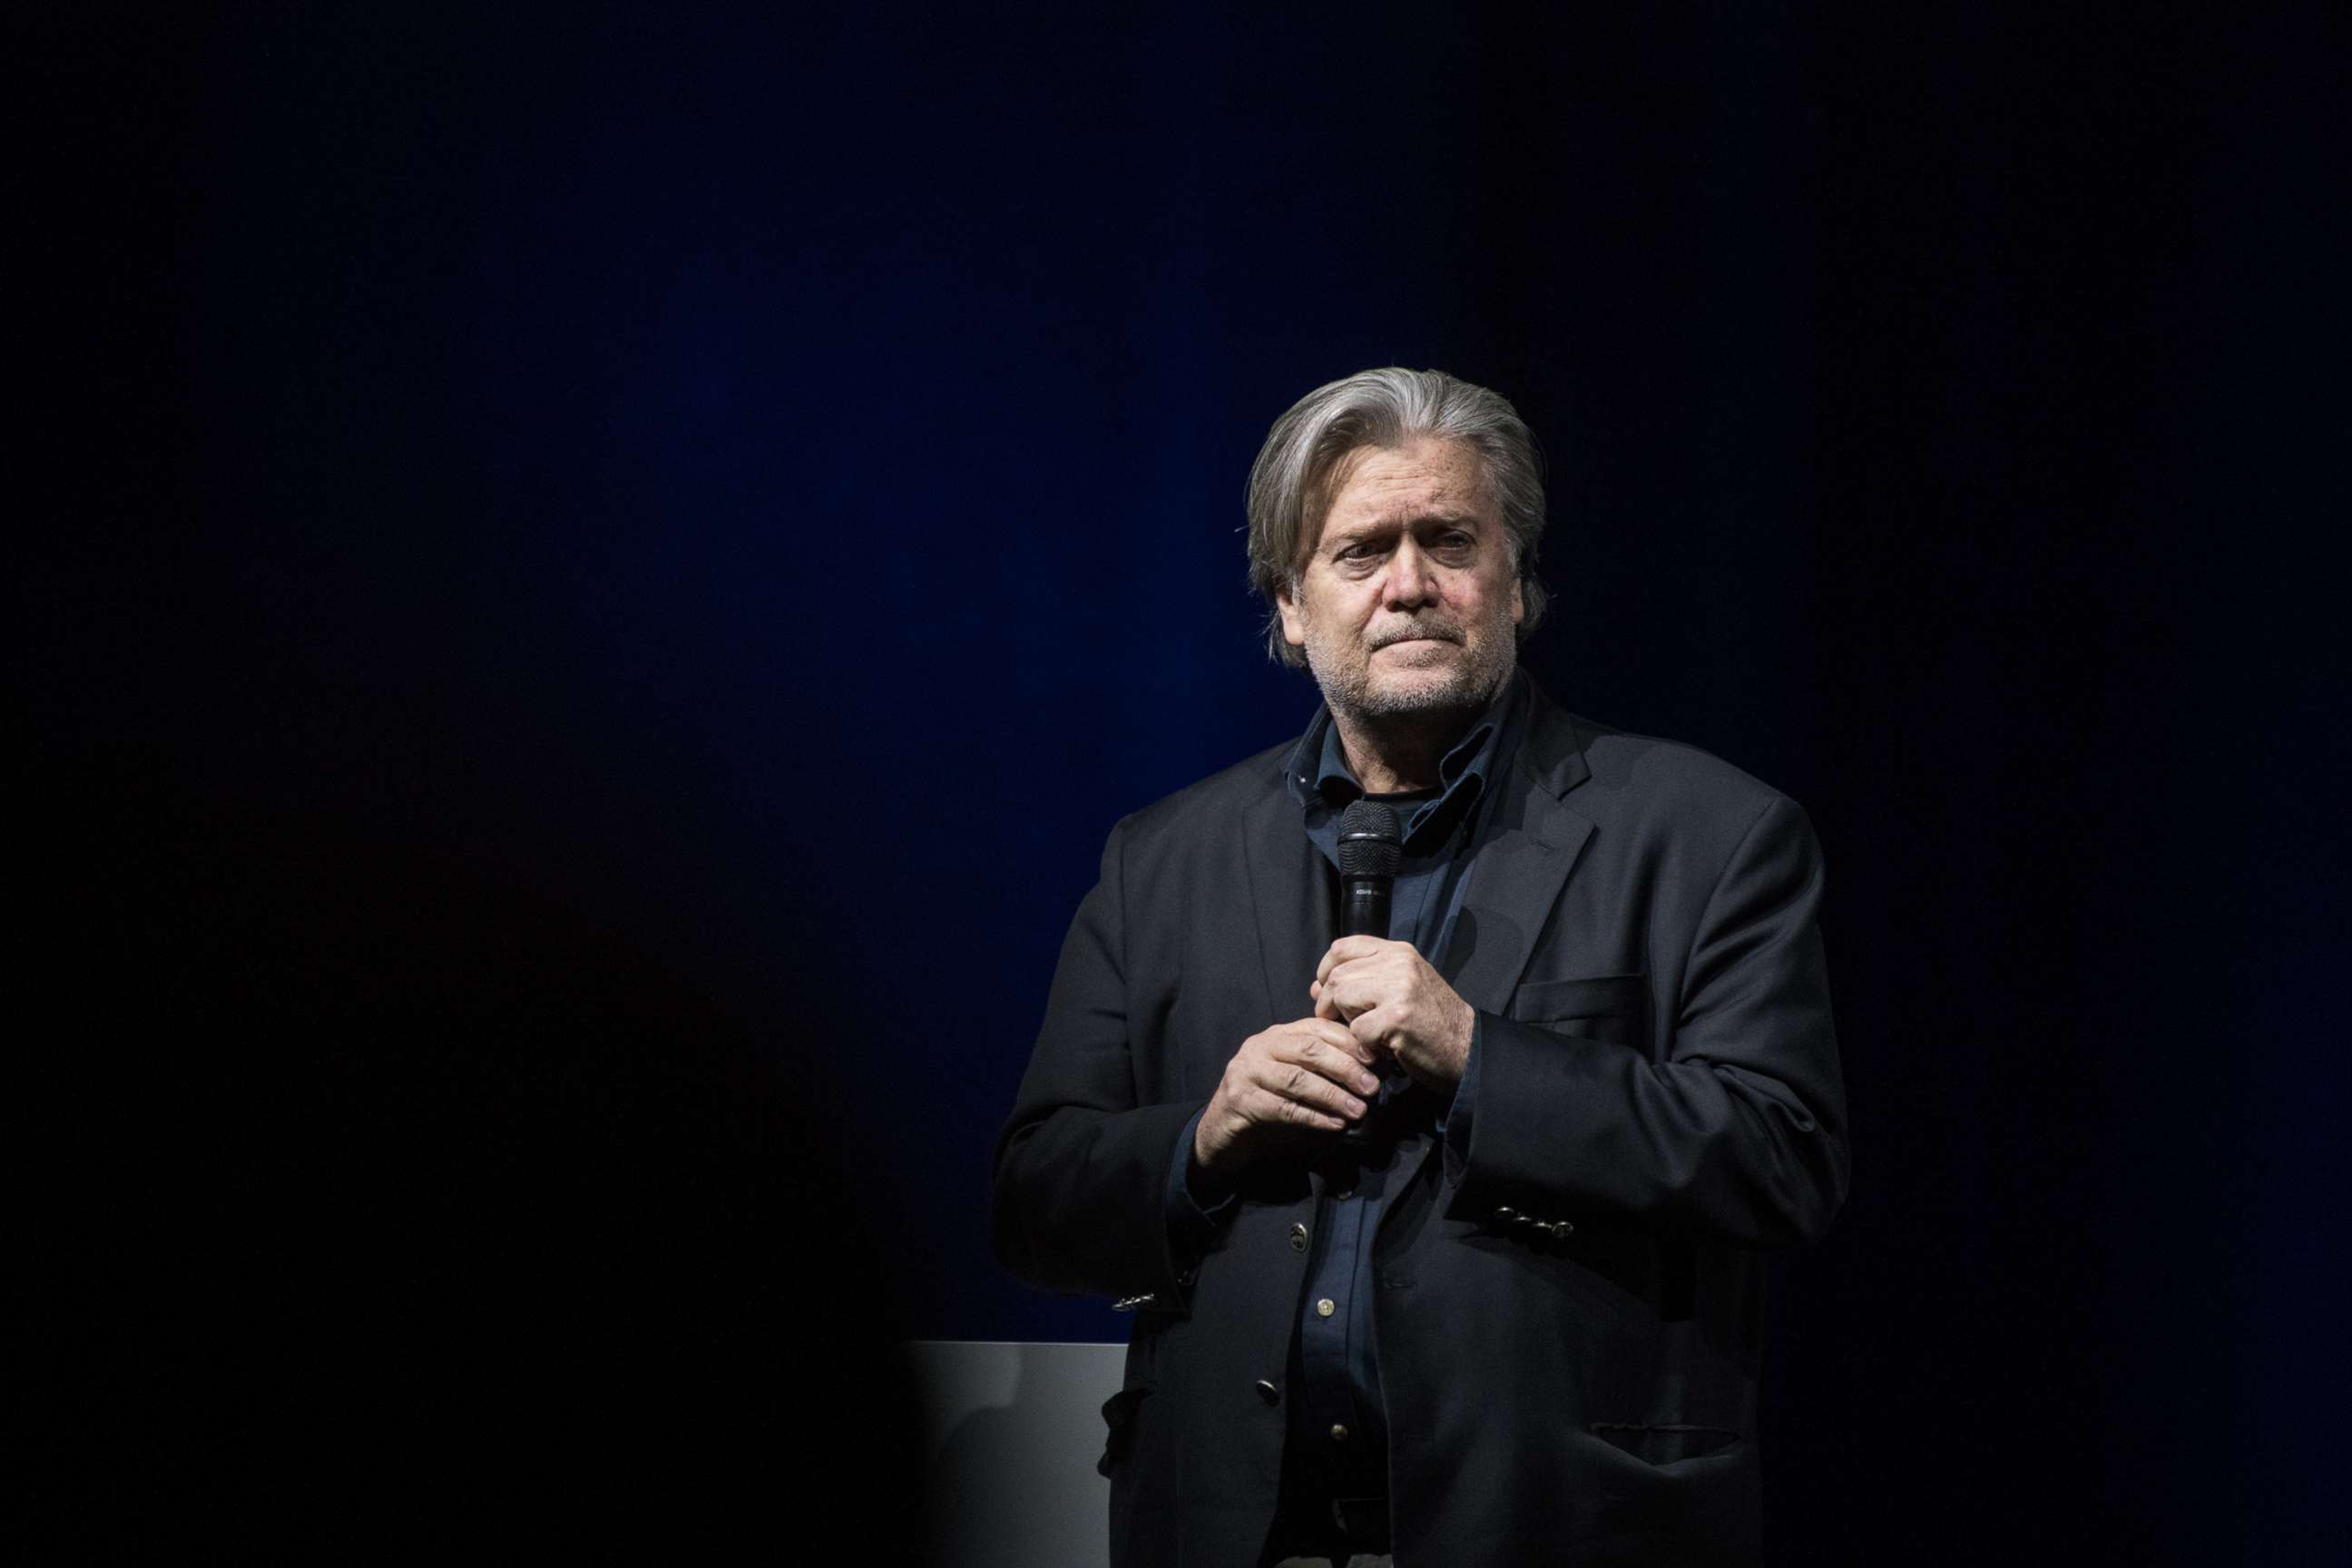 PHOTO: Steve Bannon, the former chief strategist for U.S. President Donald Trump, speaks at an event hosted by the weekly right-wing Swiss magazine Die Weltwoche on March 6, 2018 in Zurich, Switzerland.